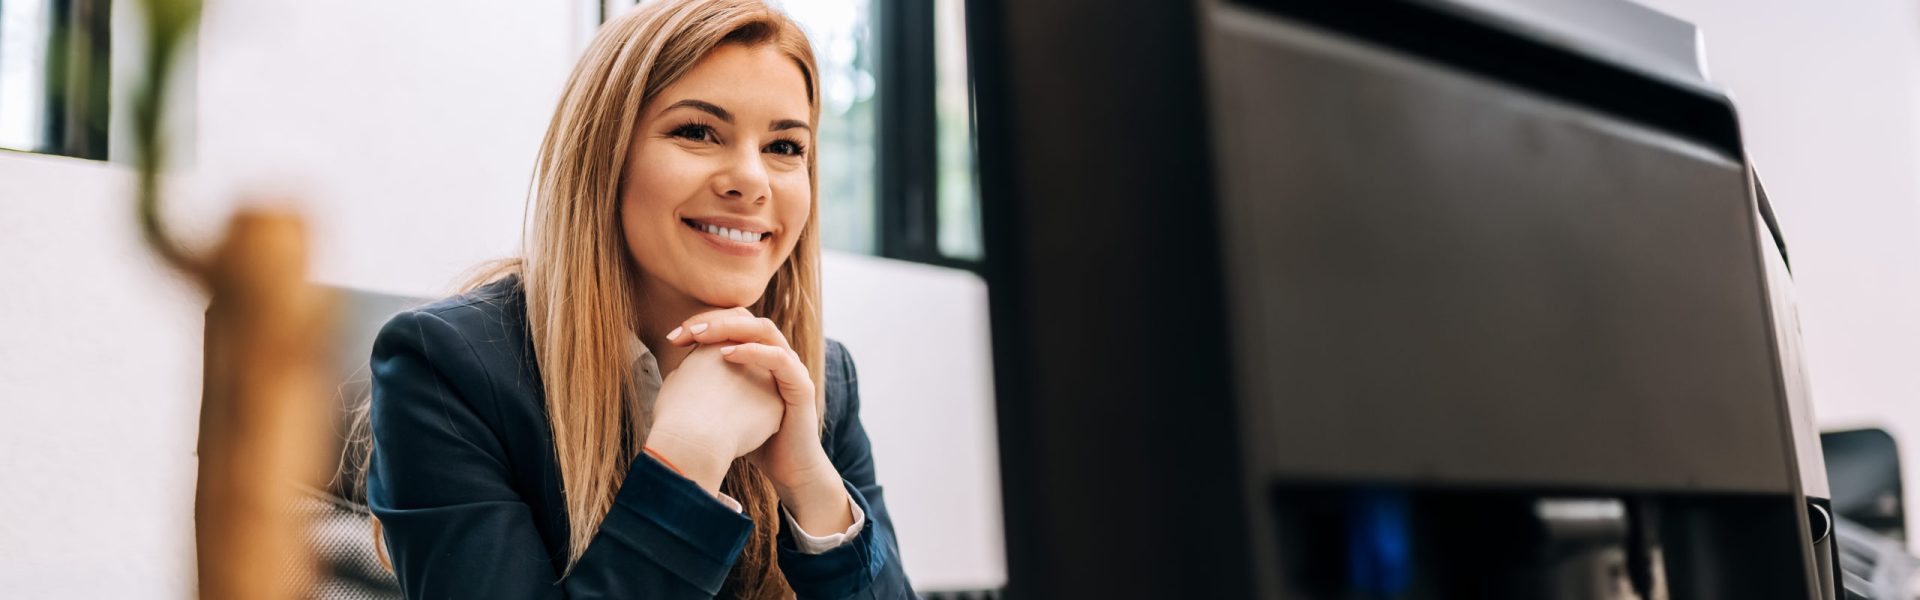 Sucessful smiling businesswoman sitting at the office in front of a computer.